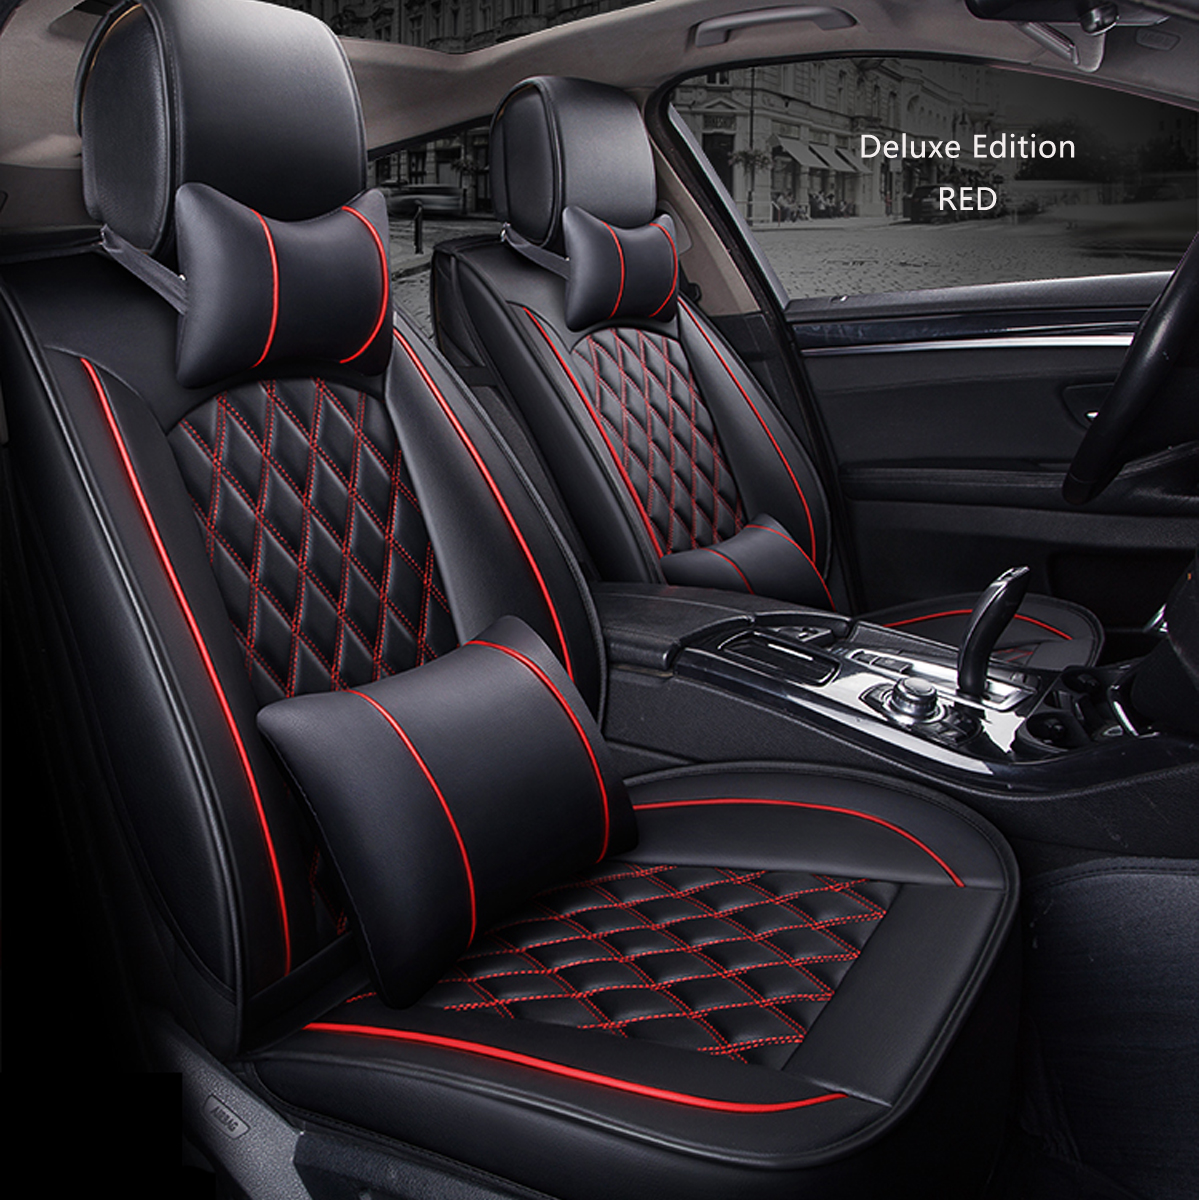 Best Leather Seat Covers (Review & Buying Guide) in 2020 - The Drive